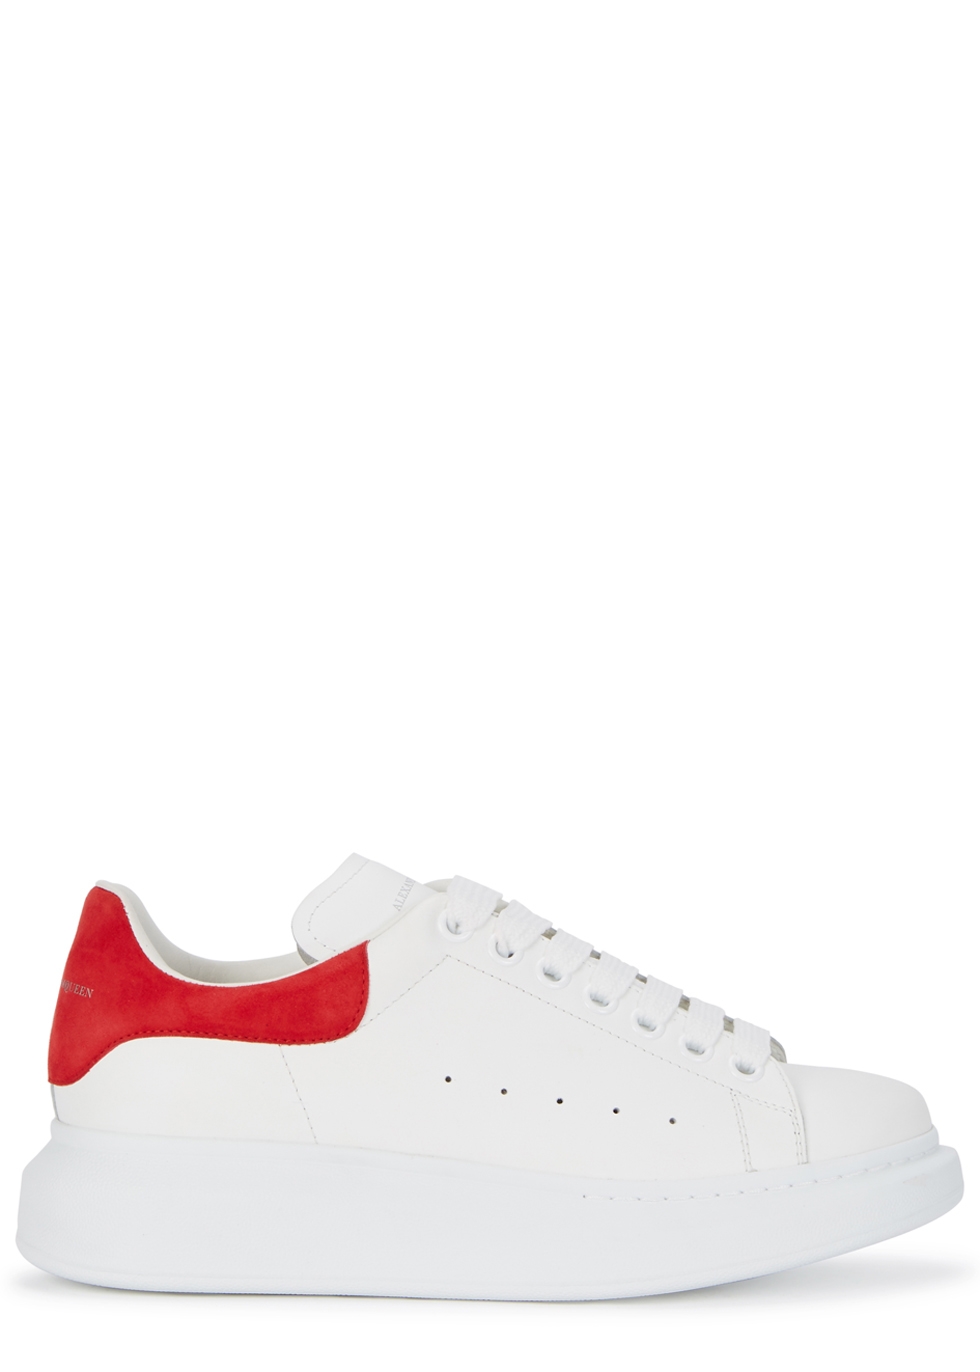 alexander mcqueen shoes red and white